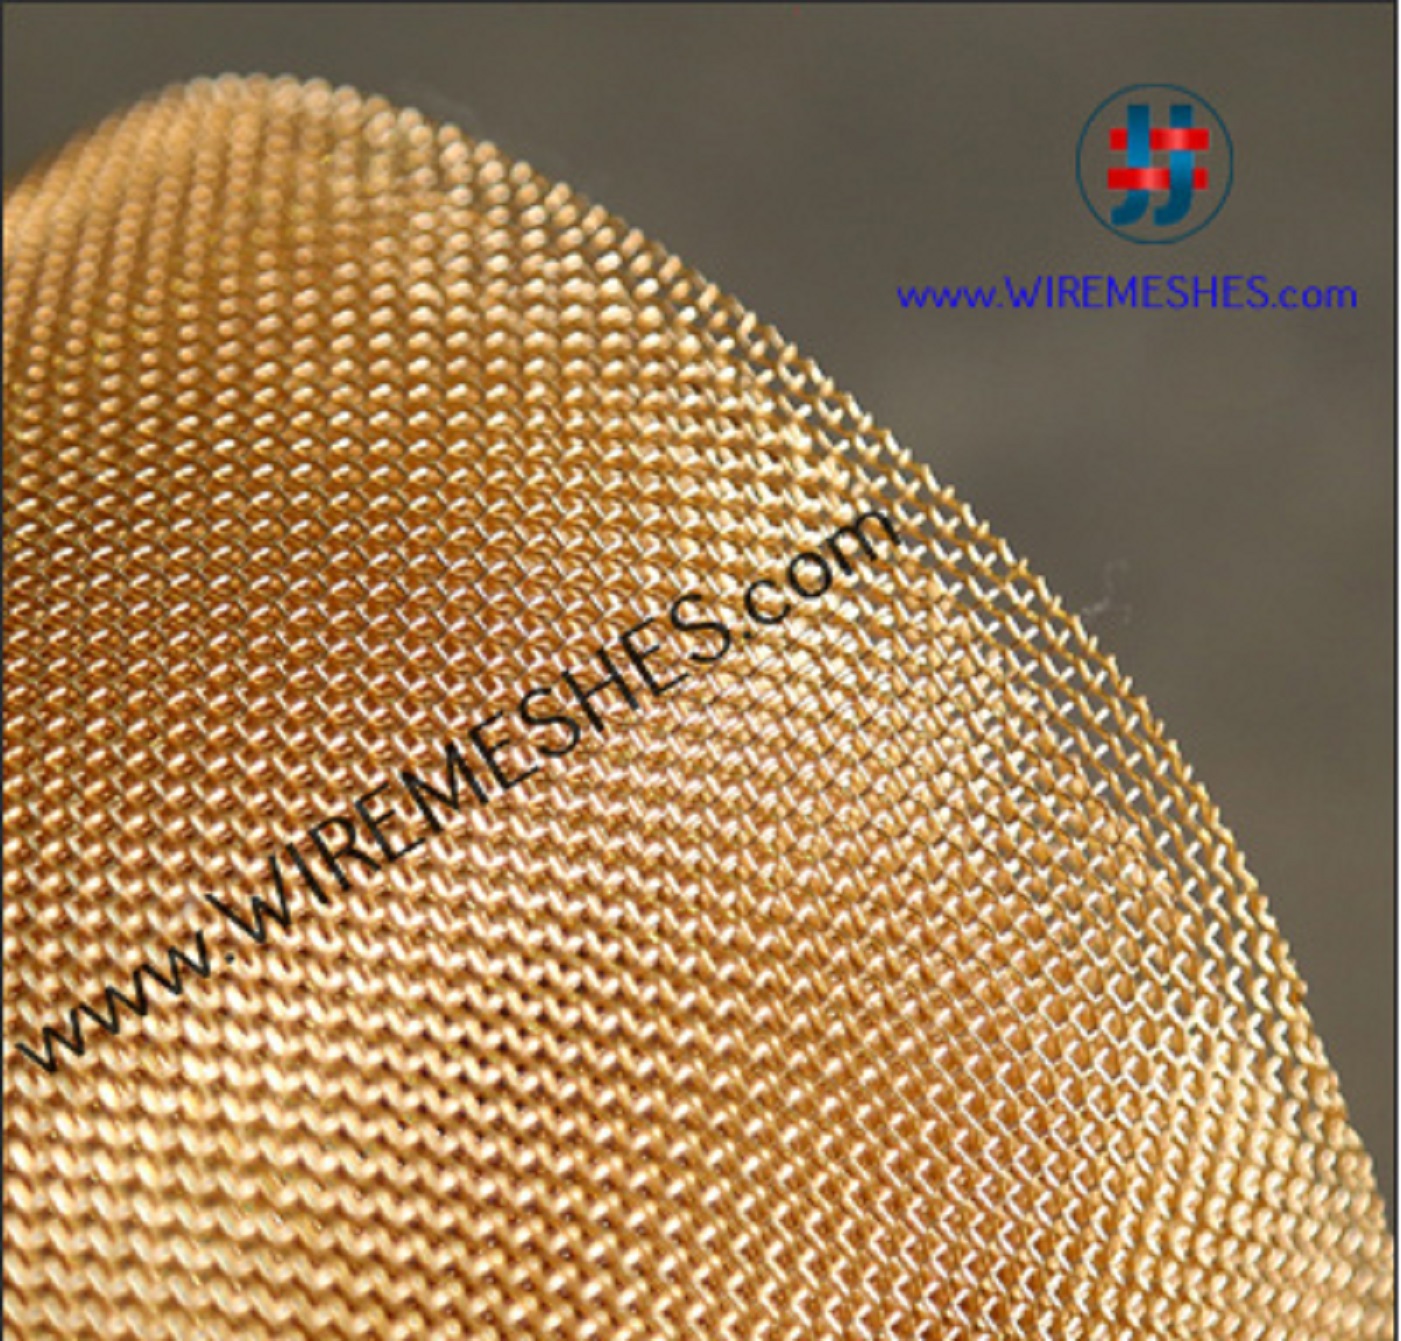 Brass Wiremesh – Wire mesh and wire netting dealer of HINDMESH brand